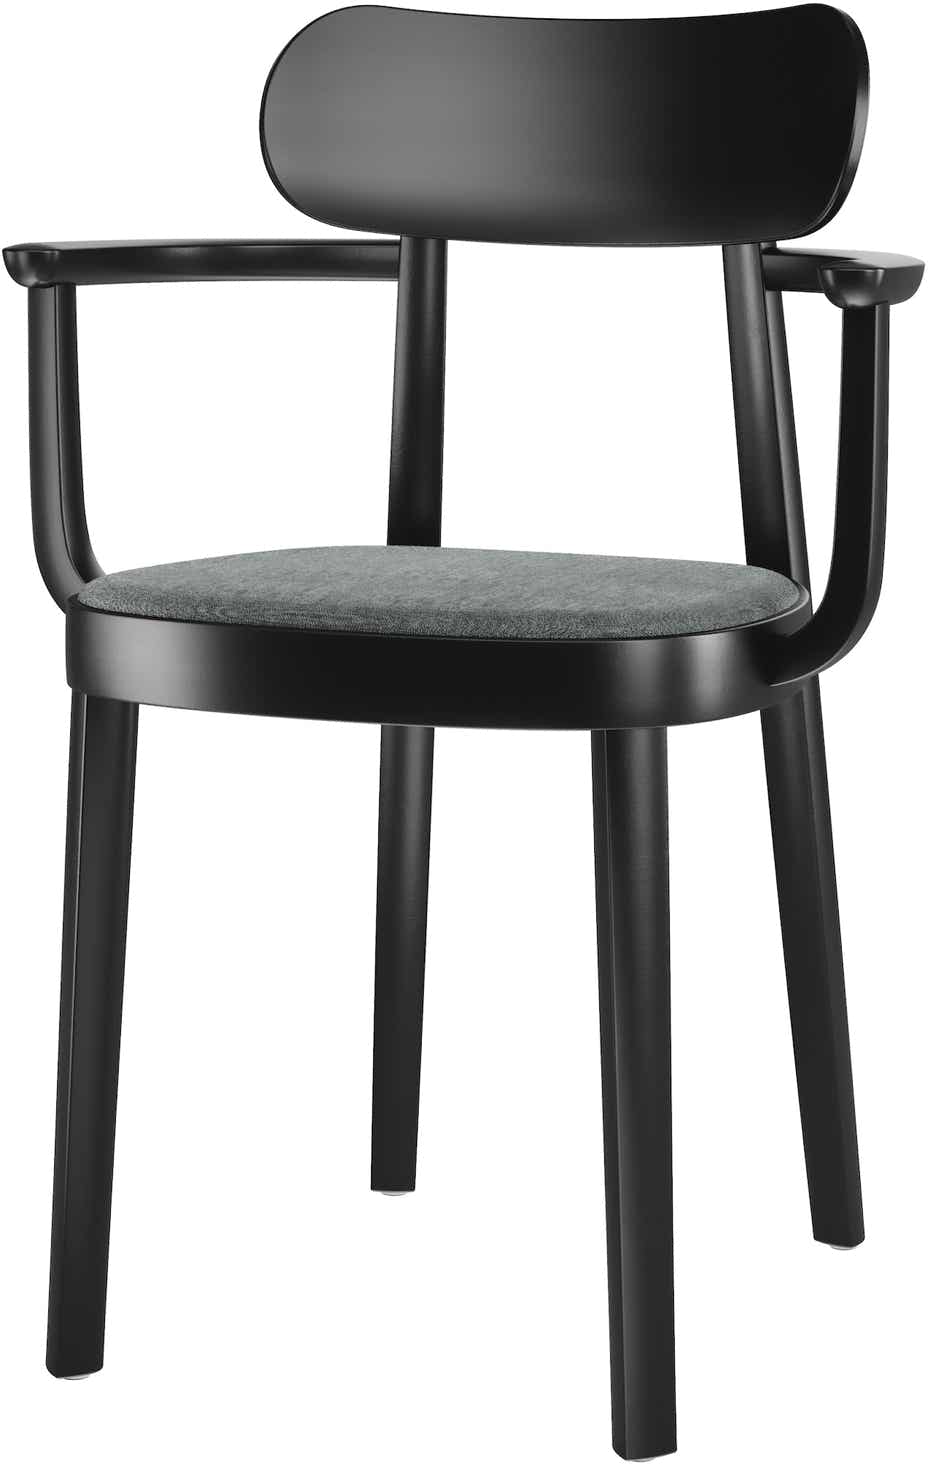 118 SP / 118 SPF Chair (upholstered seat)